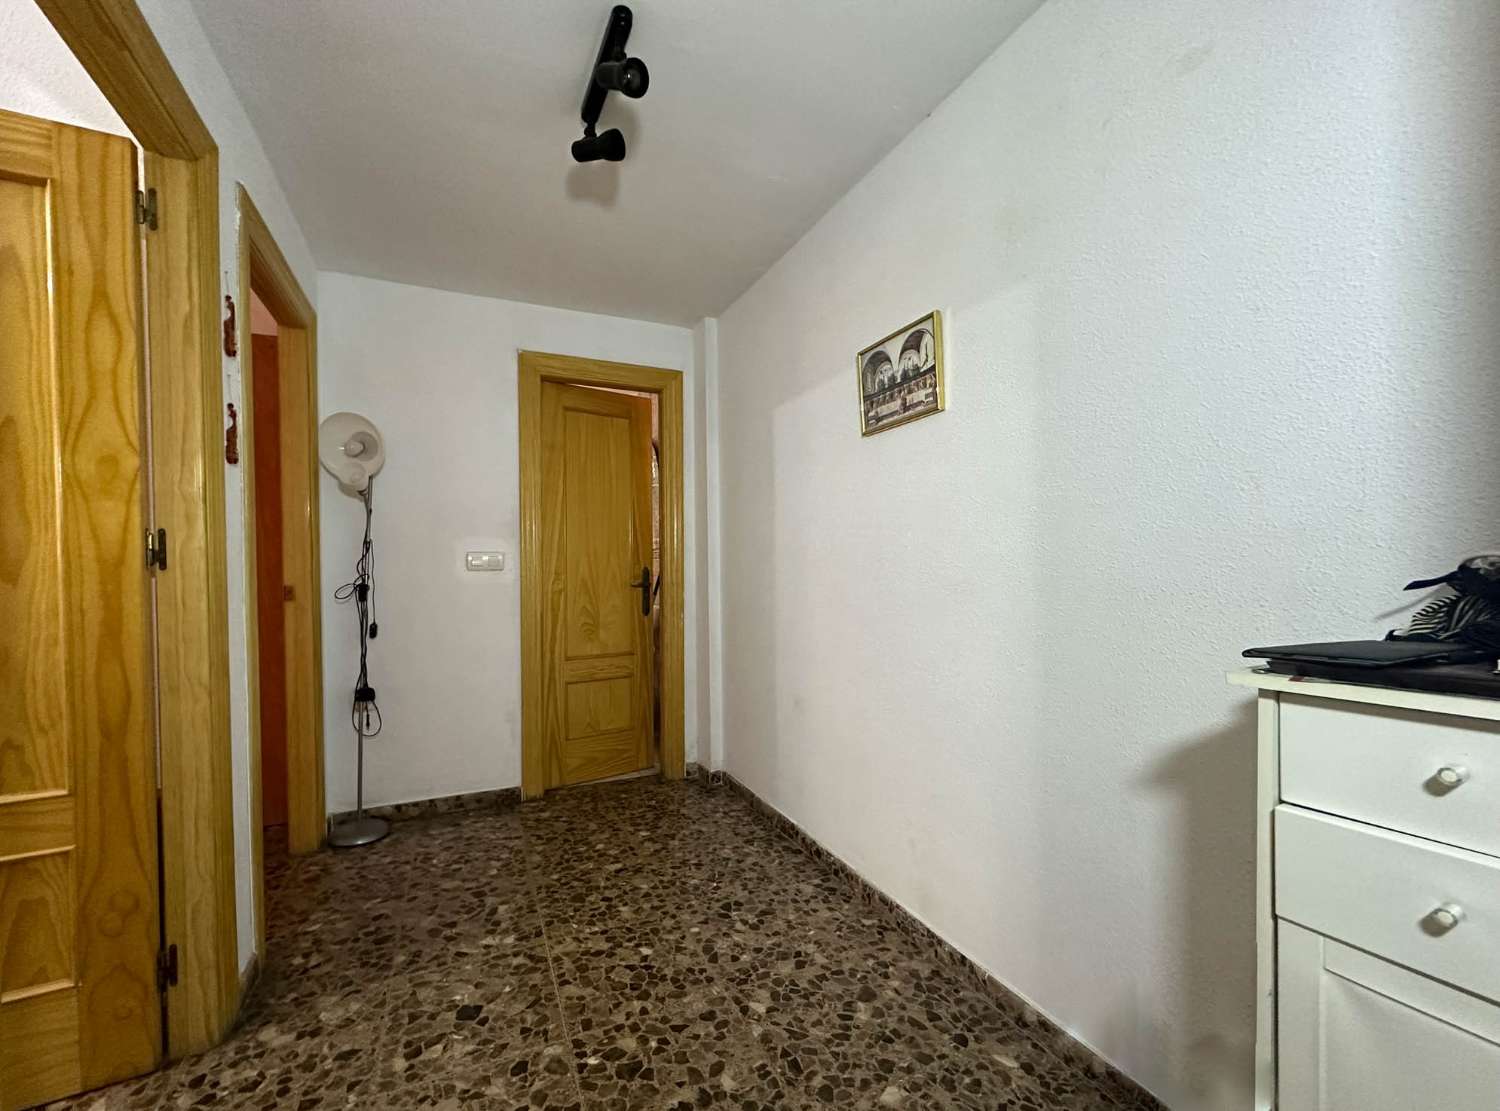 Apartment with garage for sale in the center of Salobrena